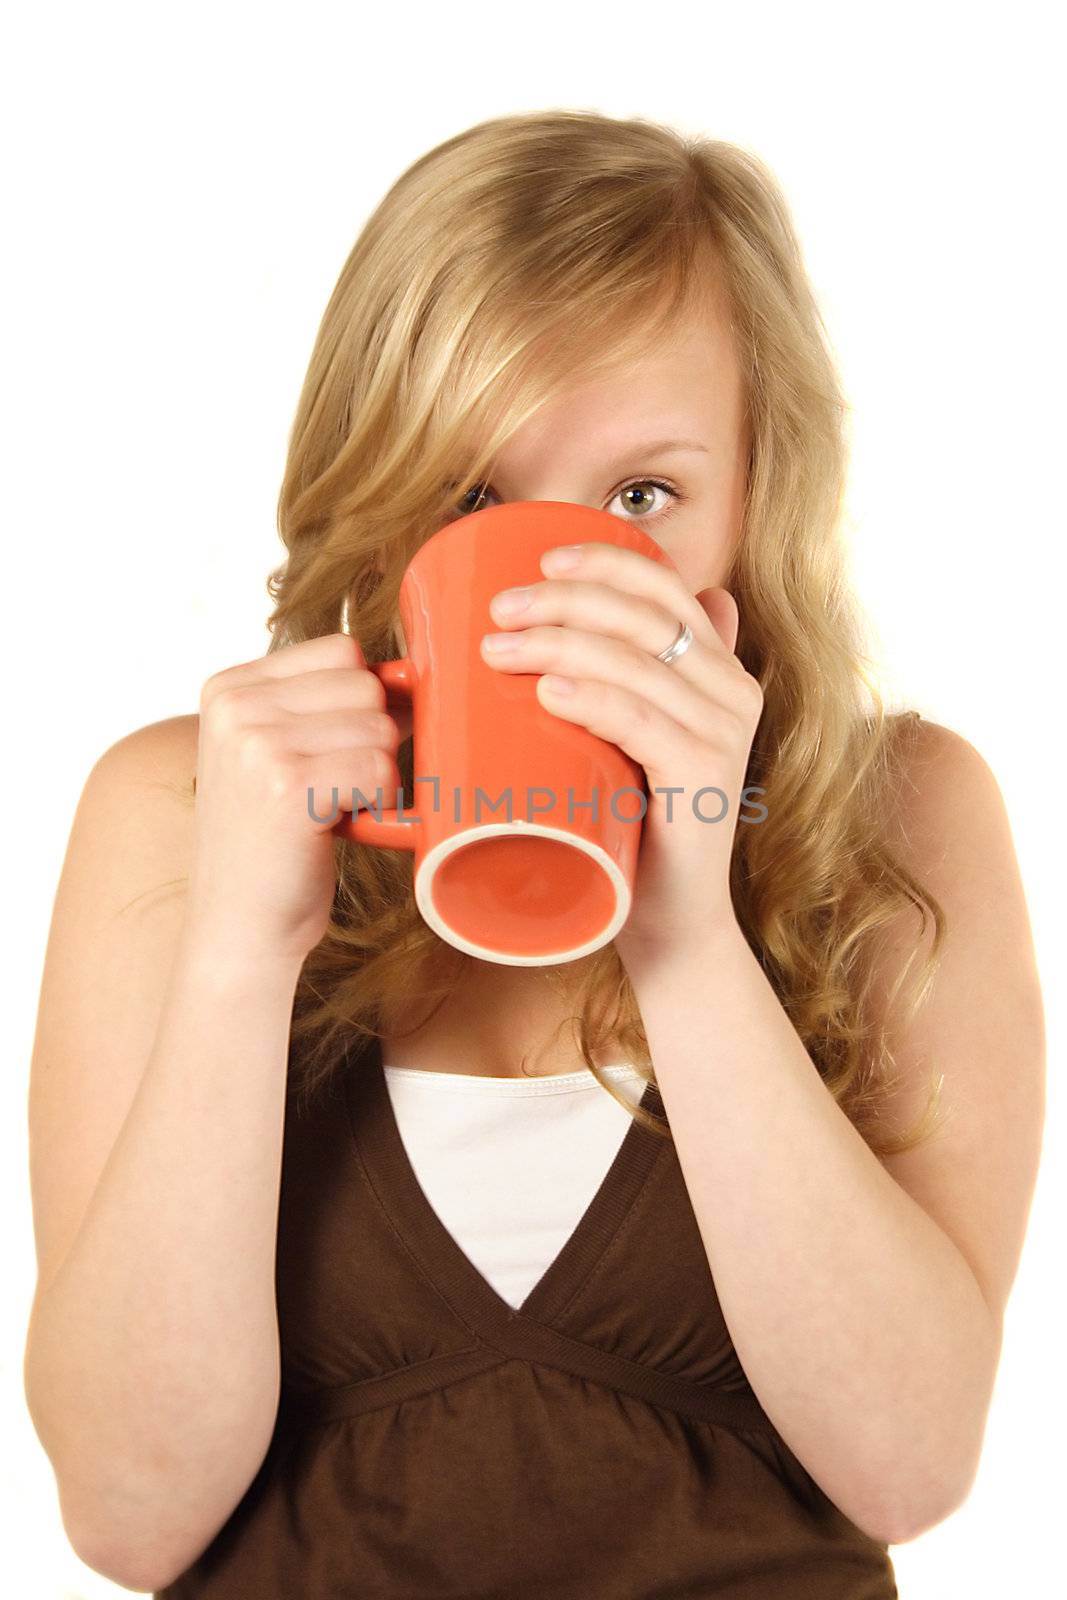 A young handsome woman drinking a cup of coffee. All isolated on white background.